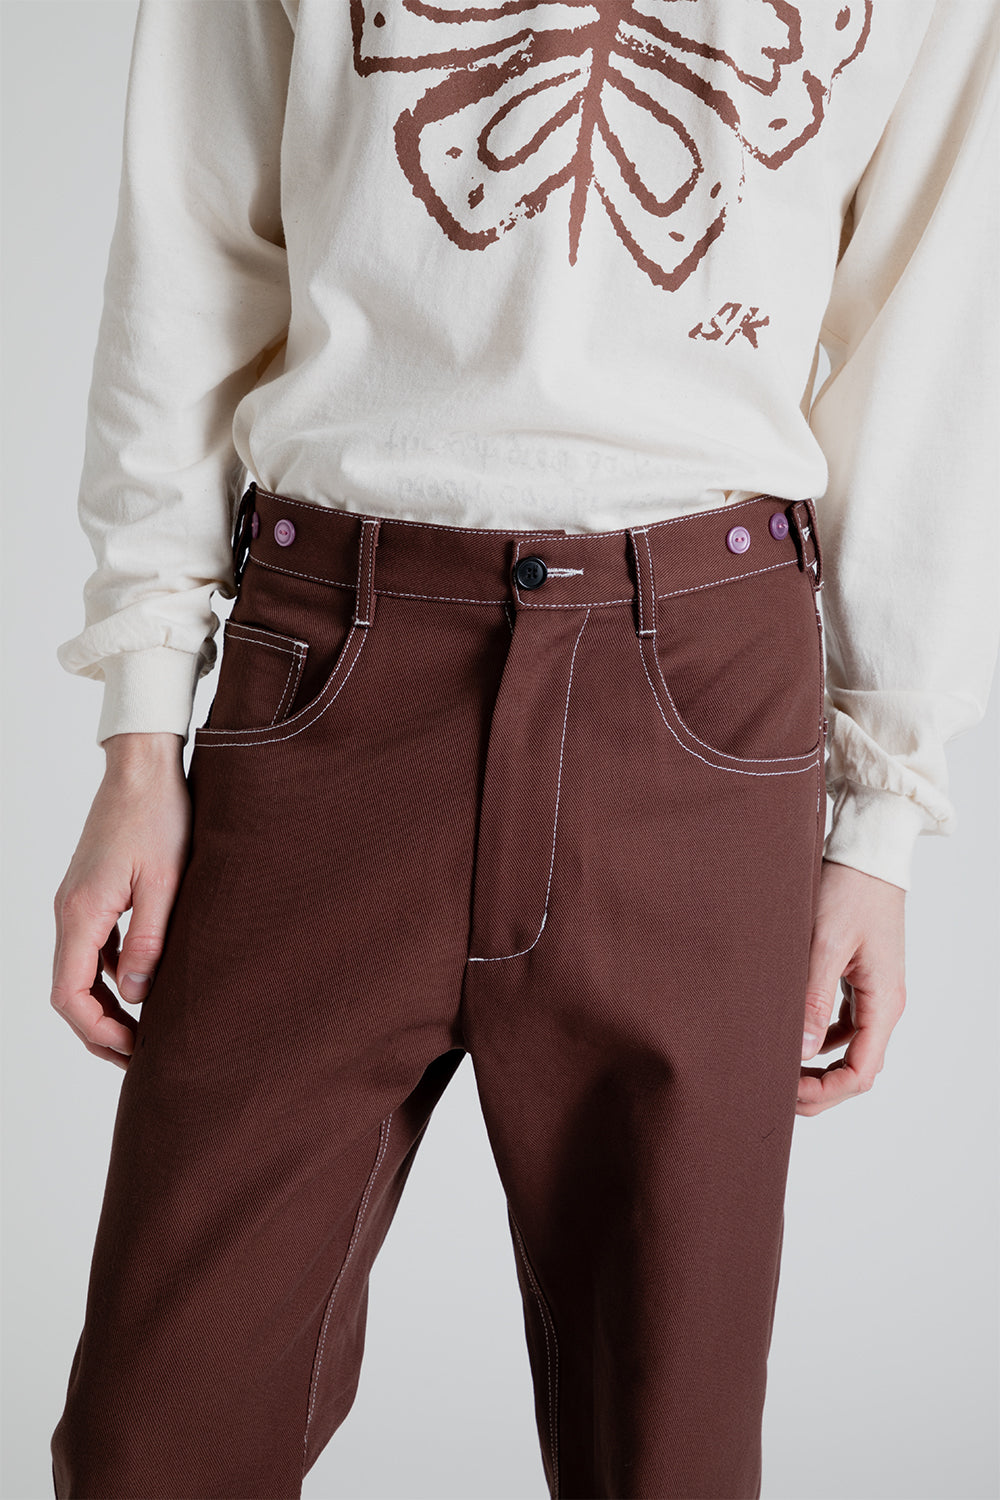 S.K. Manor Hill Ranch Pant in Brown Cotton Twill